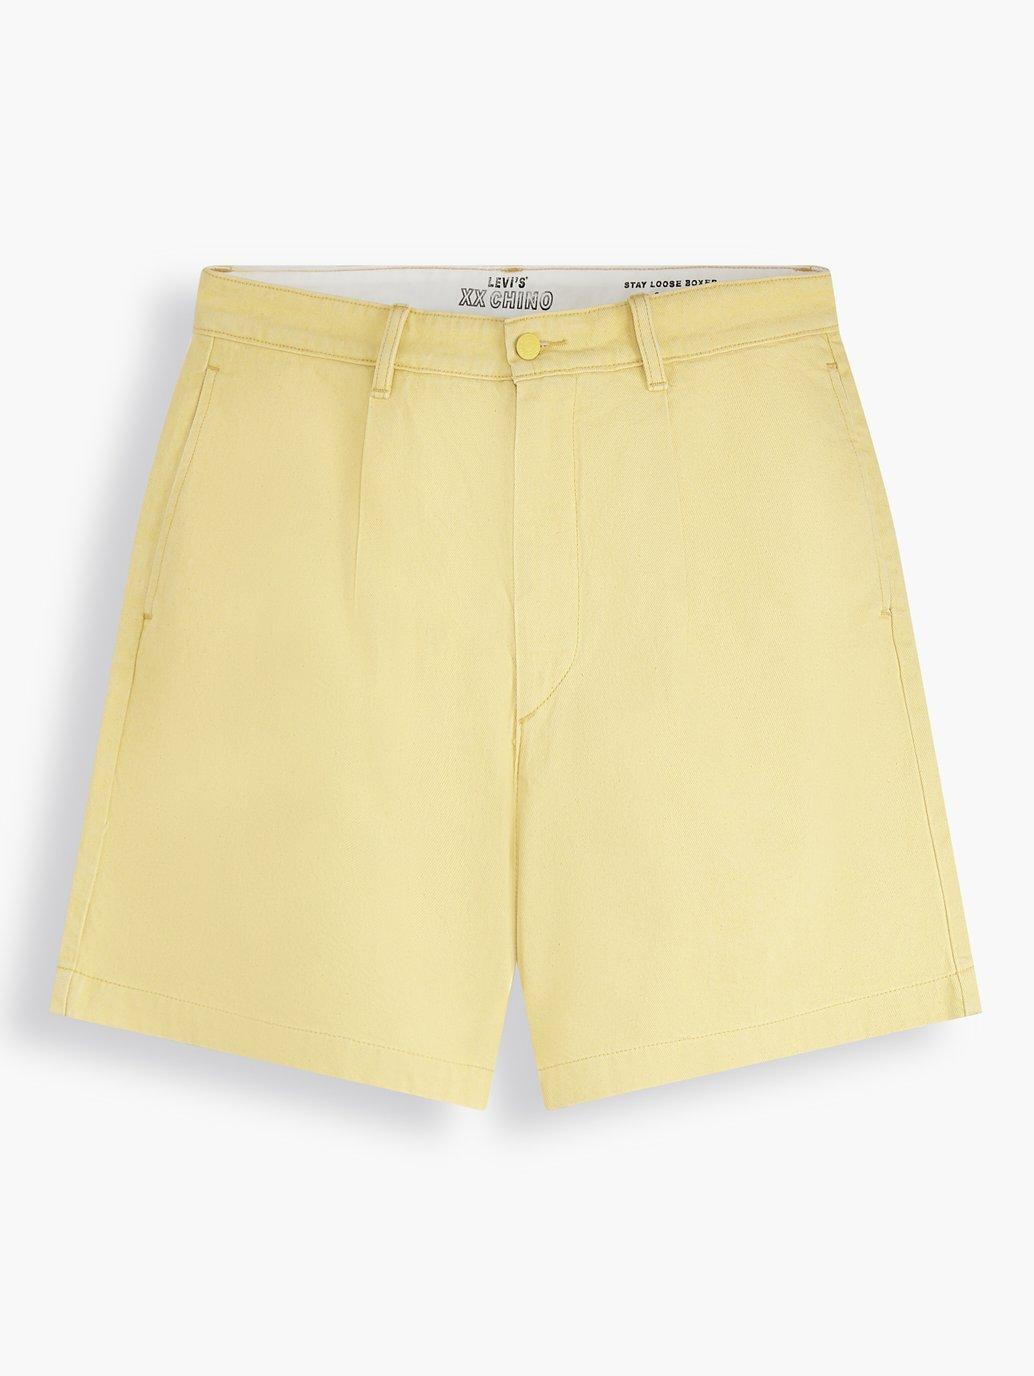 levis singapore mens xx chino pleated shorts A22520000 21 Details